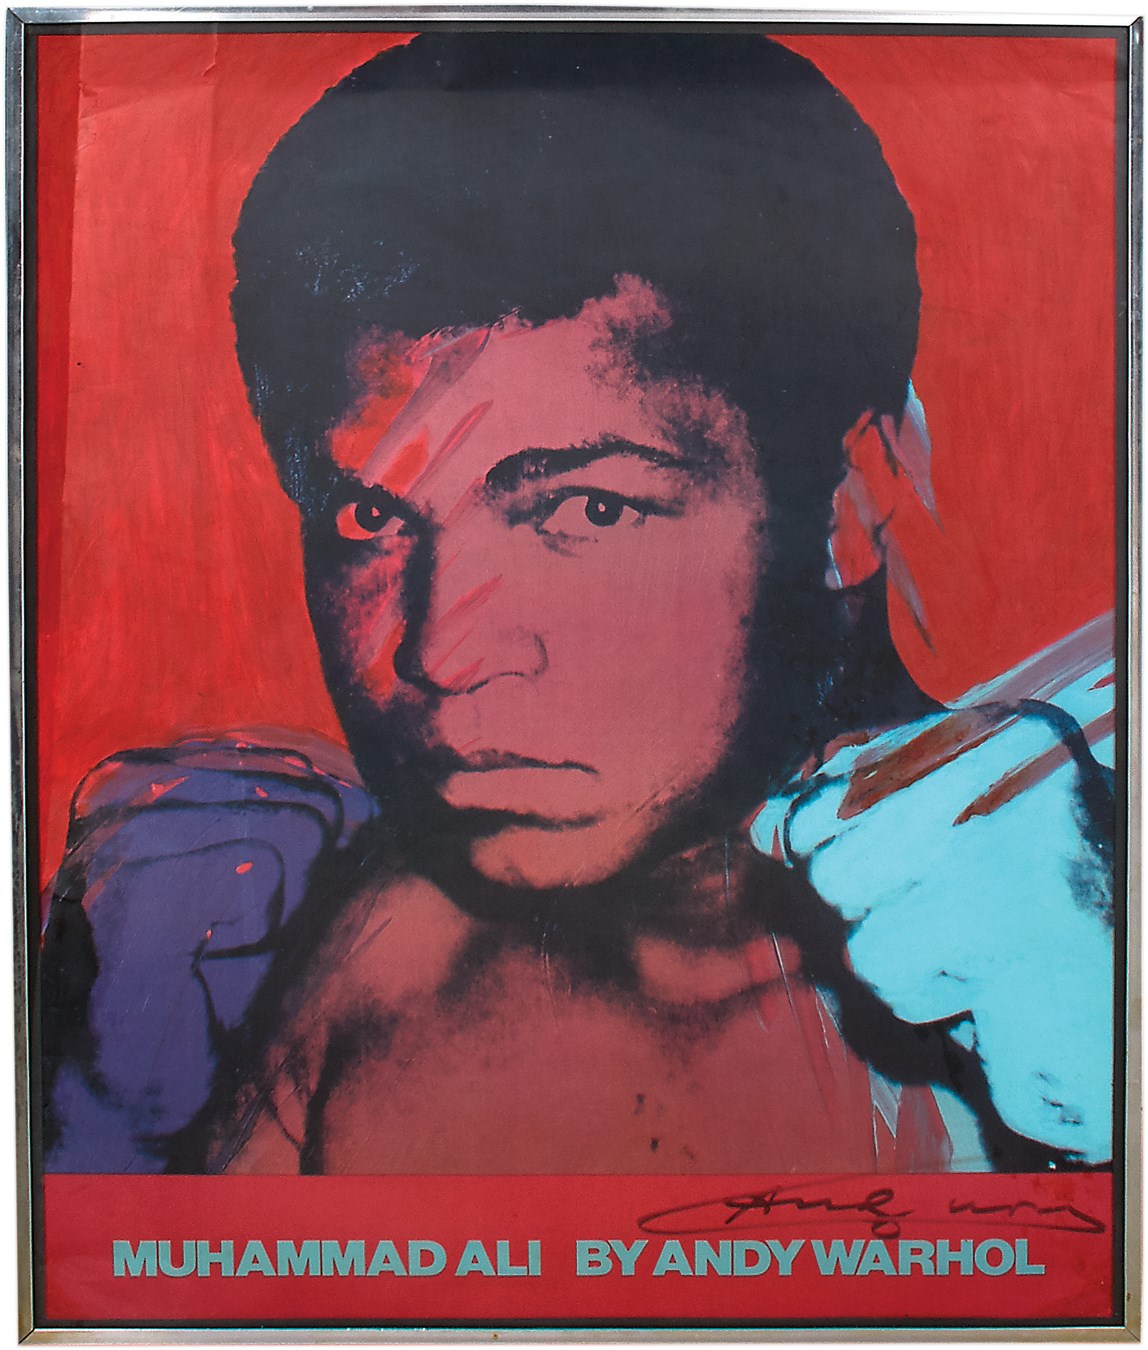 Muhammad Ali & Boxing - 1978 Muhammad Ali Andy Warhol Exhibition Poster Artist Signed by Andy Warhol (PSA)